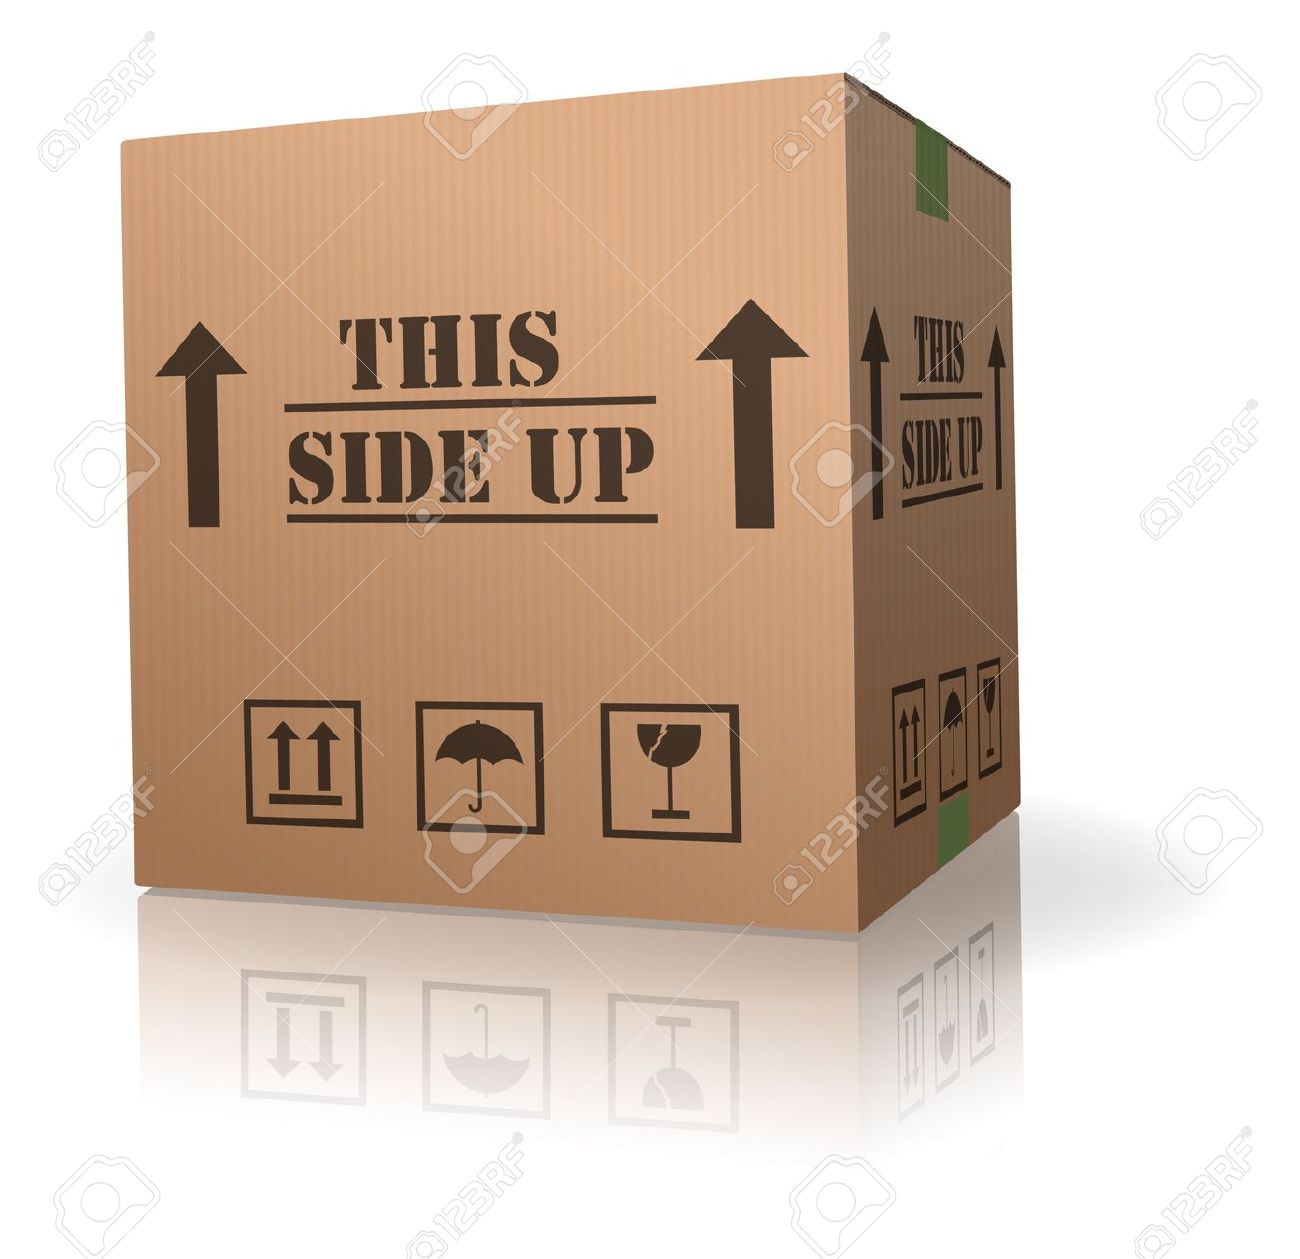 8013039-this-side-up-package-cardboard-box-with-text-Stock-Photo.jpg